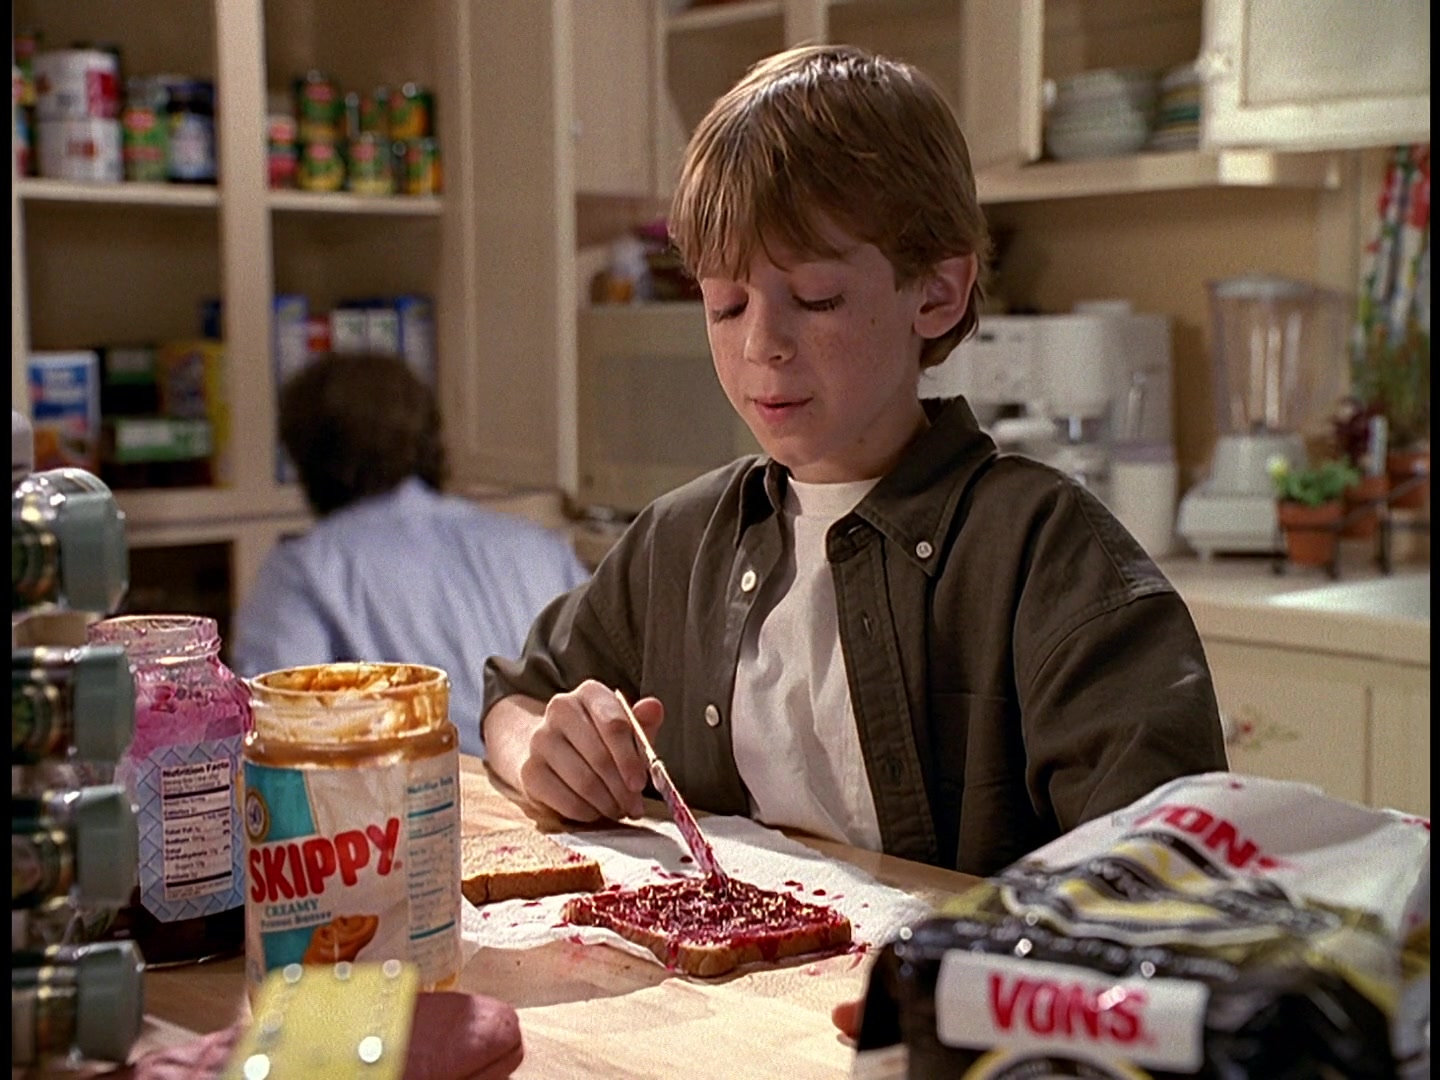 Skippy Peanut Butter And Vons Bread In Honey, We Shrunk Ourselves! 